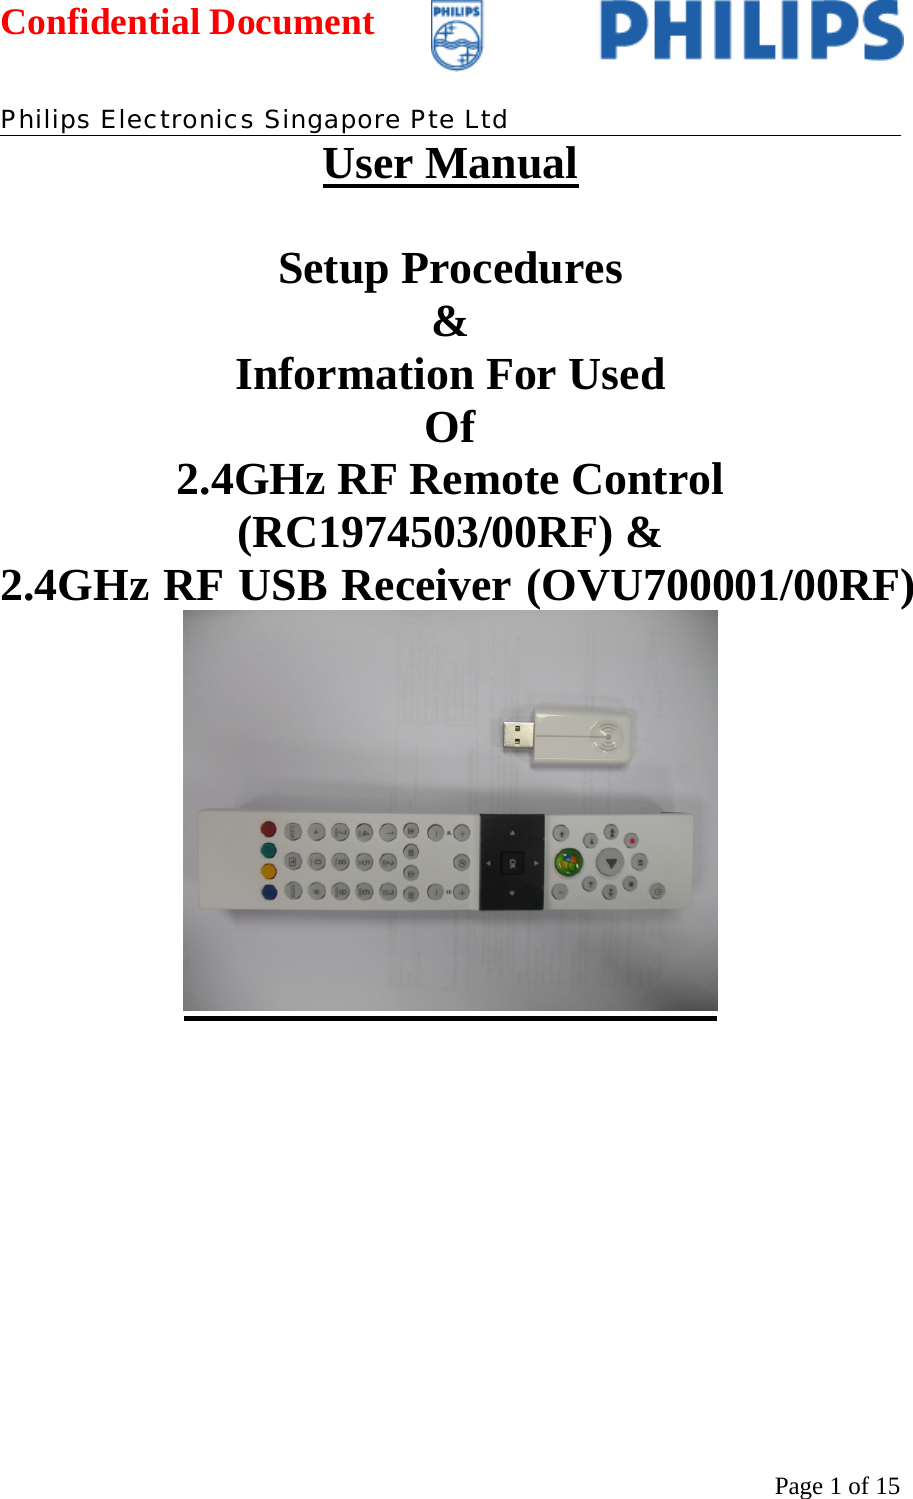 Confidential Document   Philips Electronics Singapore Pte Ltd  Page 1 of 15User Manual  Setup Procedures &amp; Information For Used Of 2.4GHz RF Remote Control (RC1974503/00RF) &amp;  2.4GHz RF USB Receiver (OVU700001/00RF)          